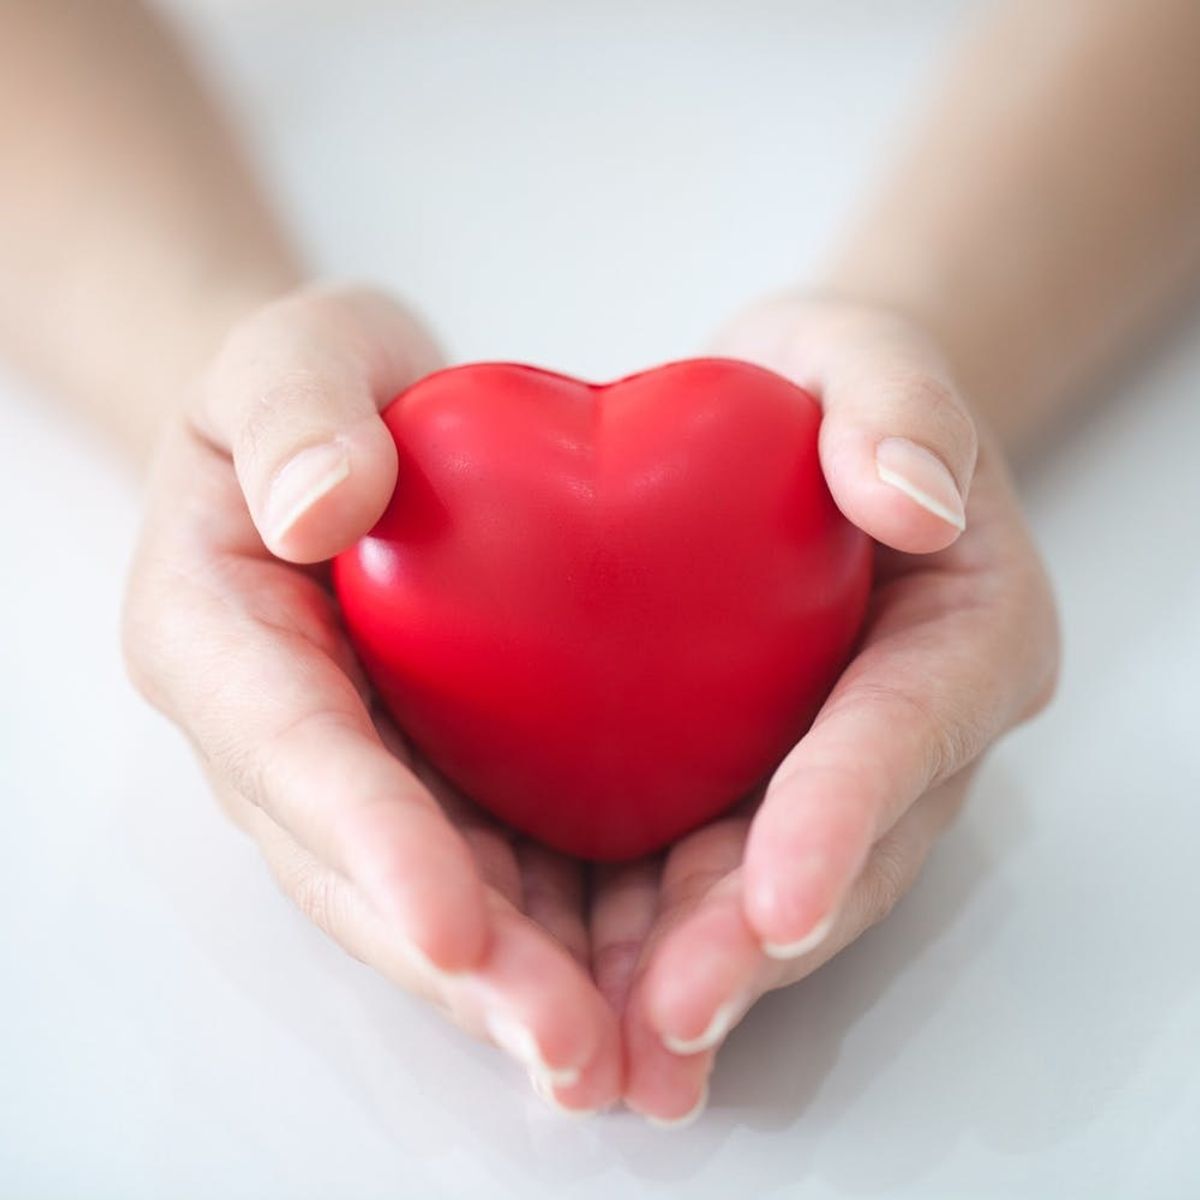 10 Surprising Facts You Didn’t Know About Your Heart